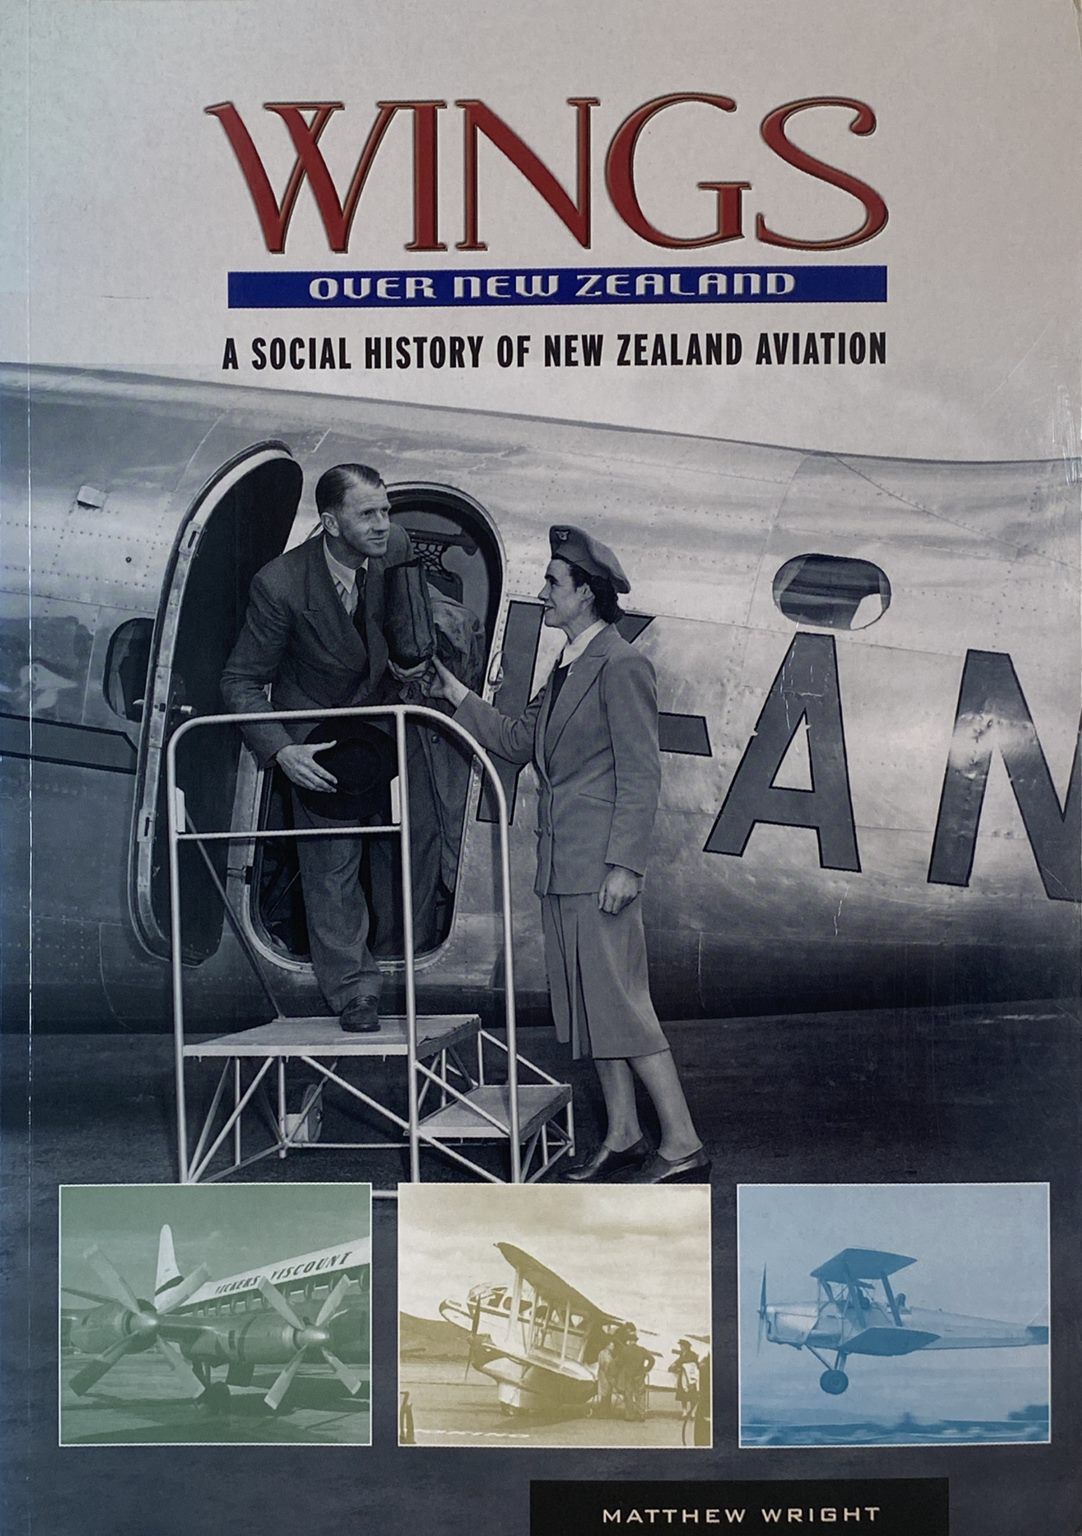 WINGS OVER NEW ZEALAND: A social history of New Zealand Aviation